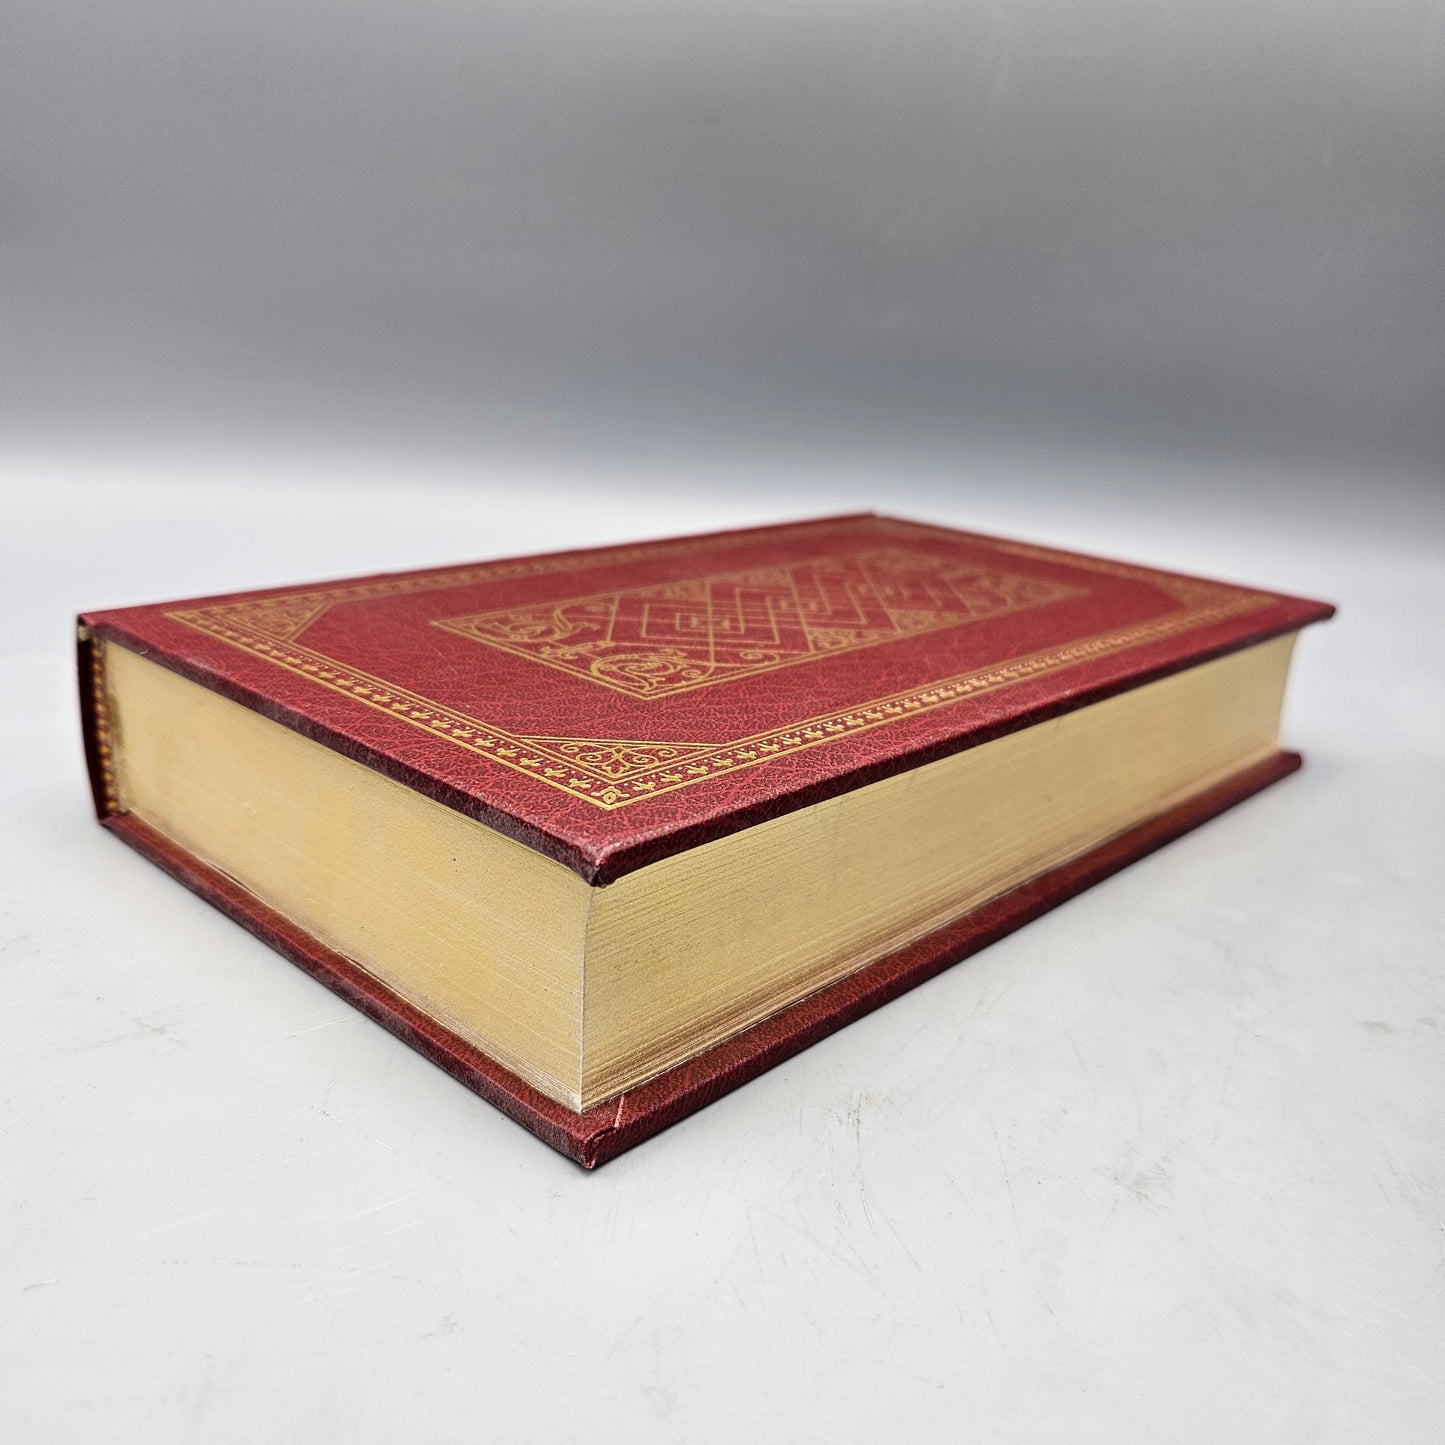 Leatherbound Book - Moliere "Comedies" Franklin Library